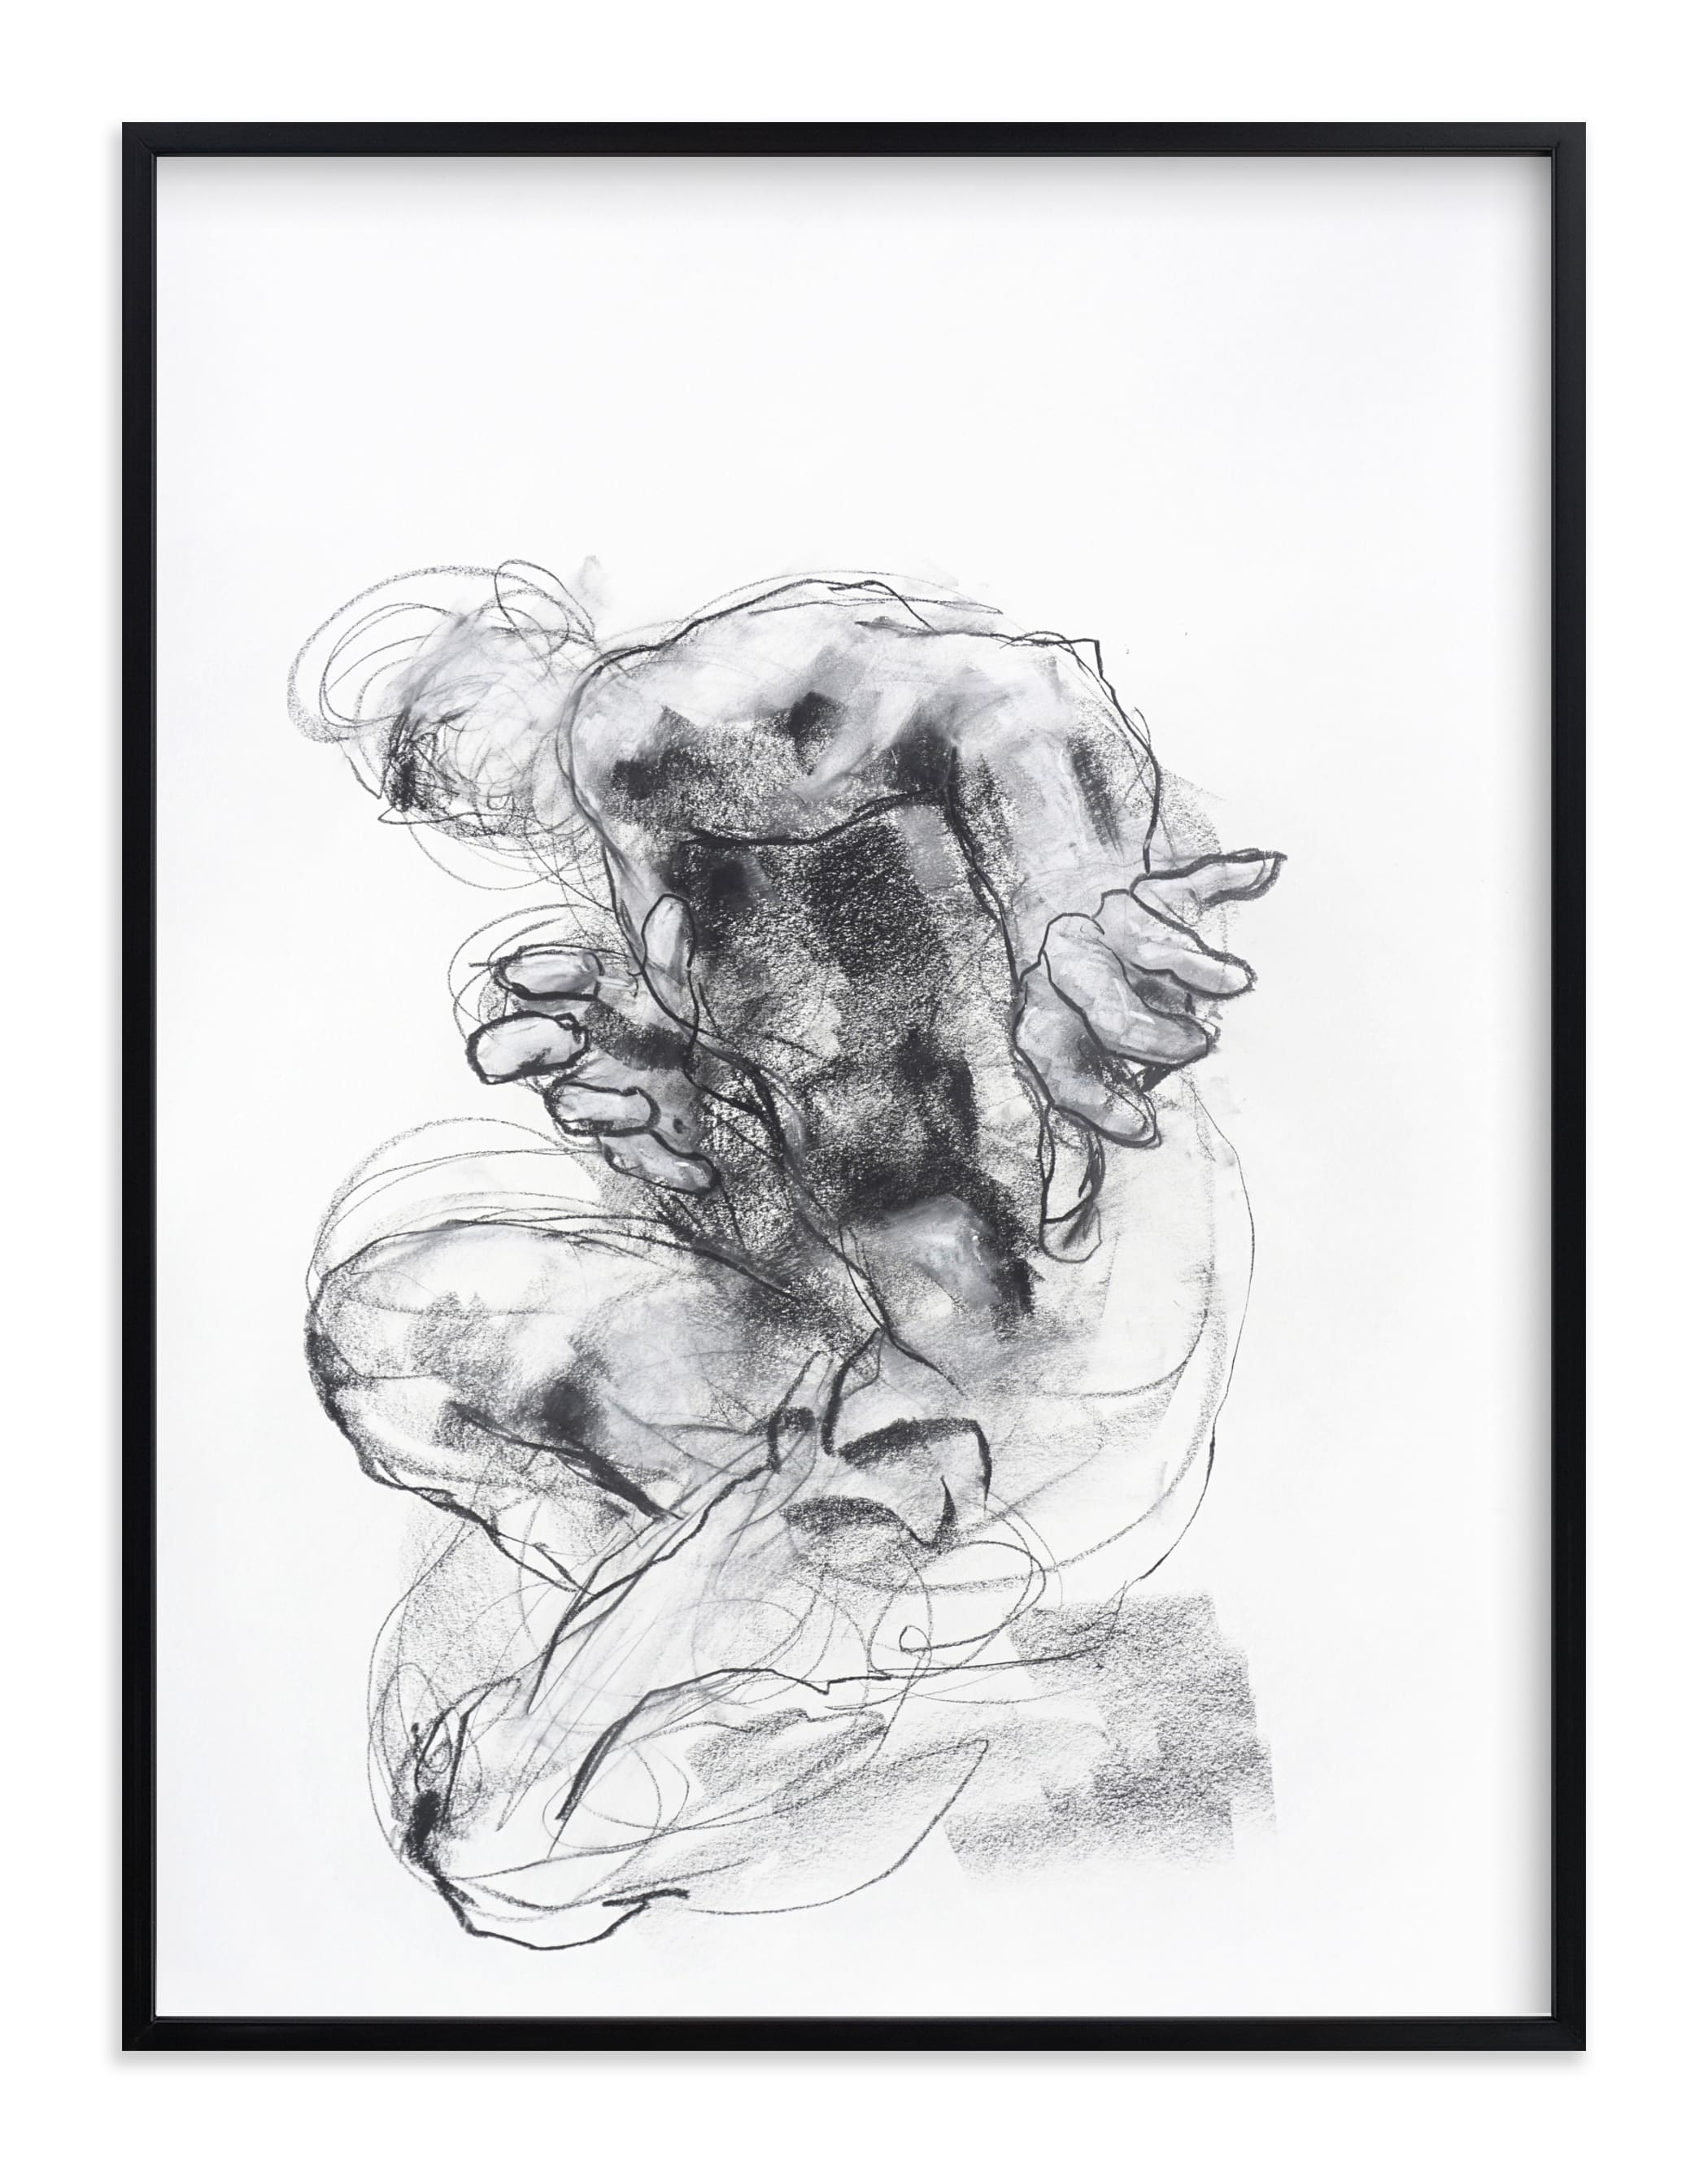 Drawing 538 - Crouching Figure Limited Edition Art Print - Image 0